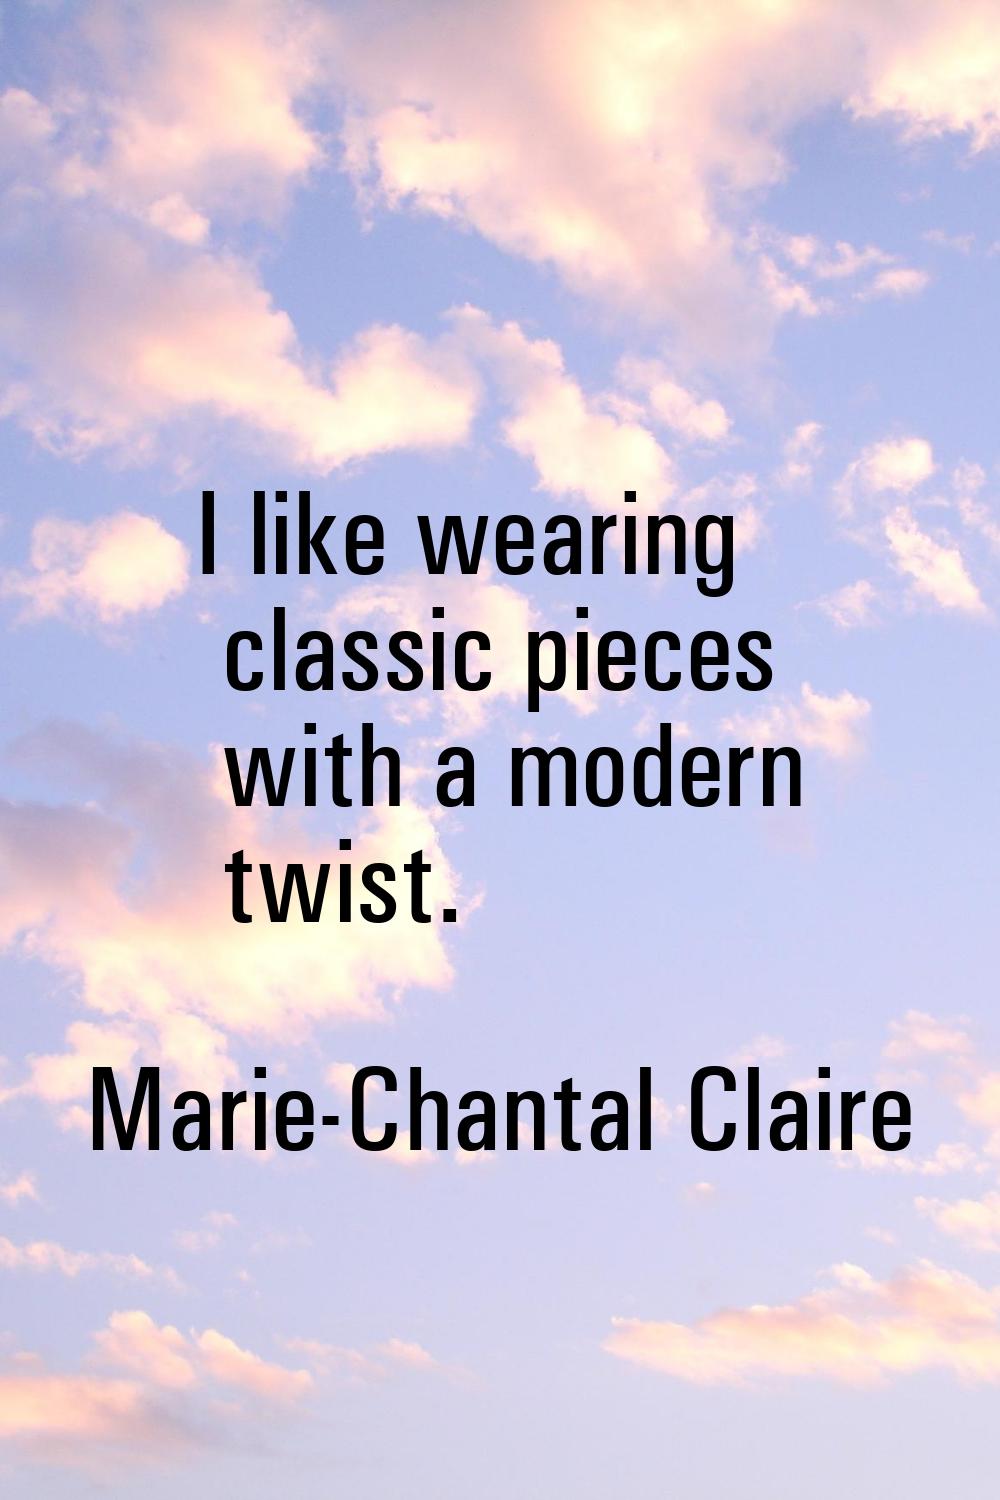 I like wearing classic pieces with a modern twist.